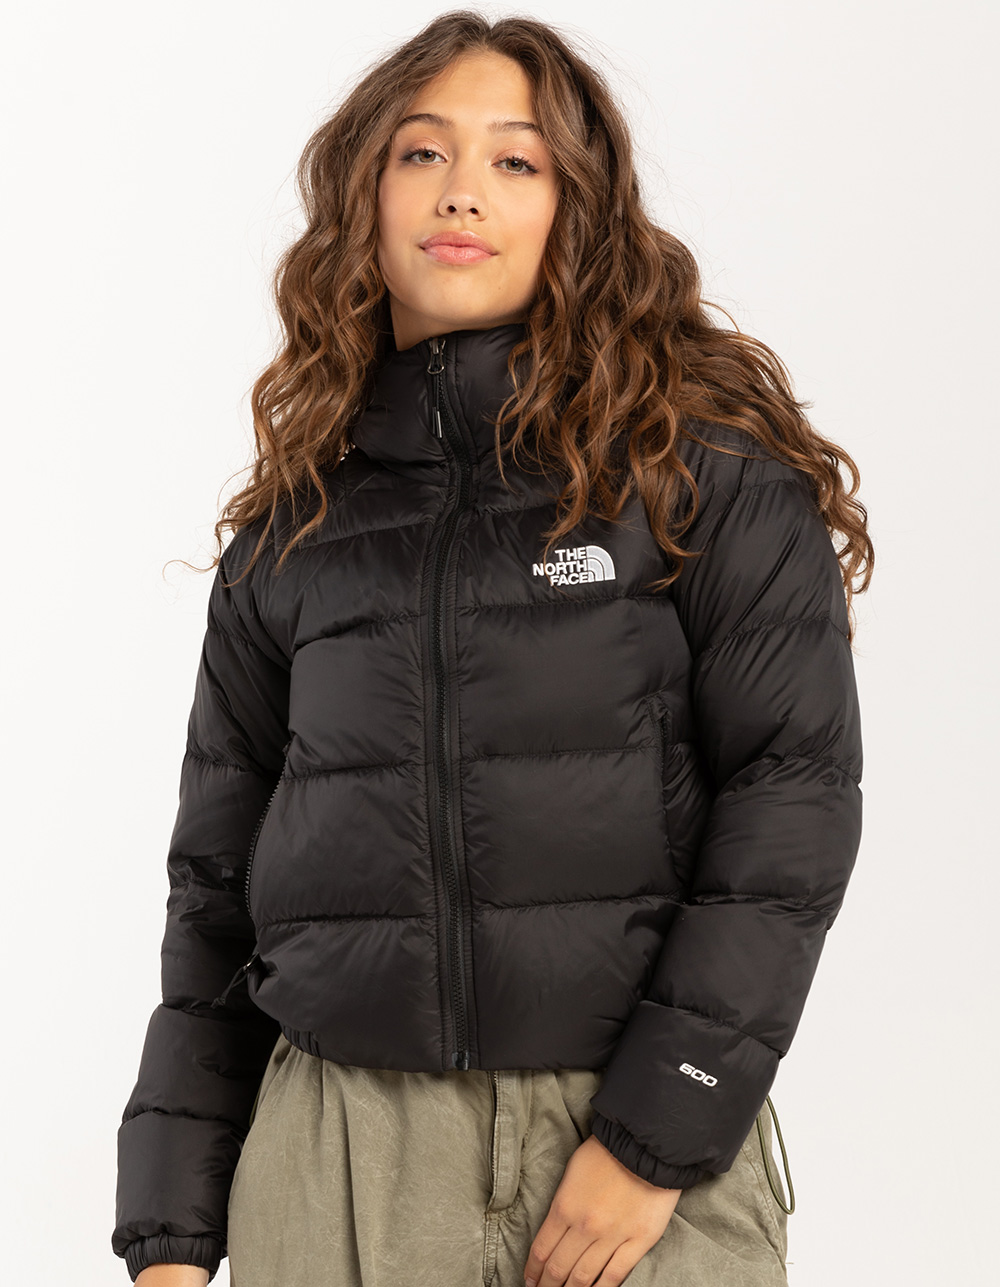 The Future is Juicy Puffy Coat